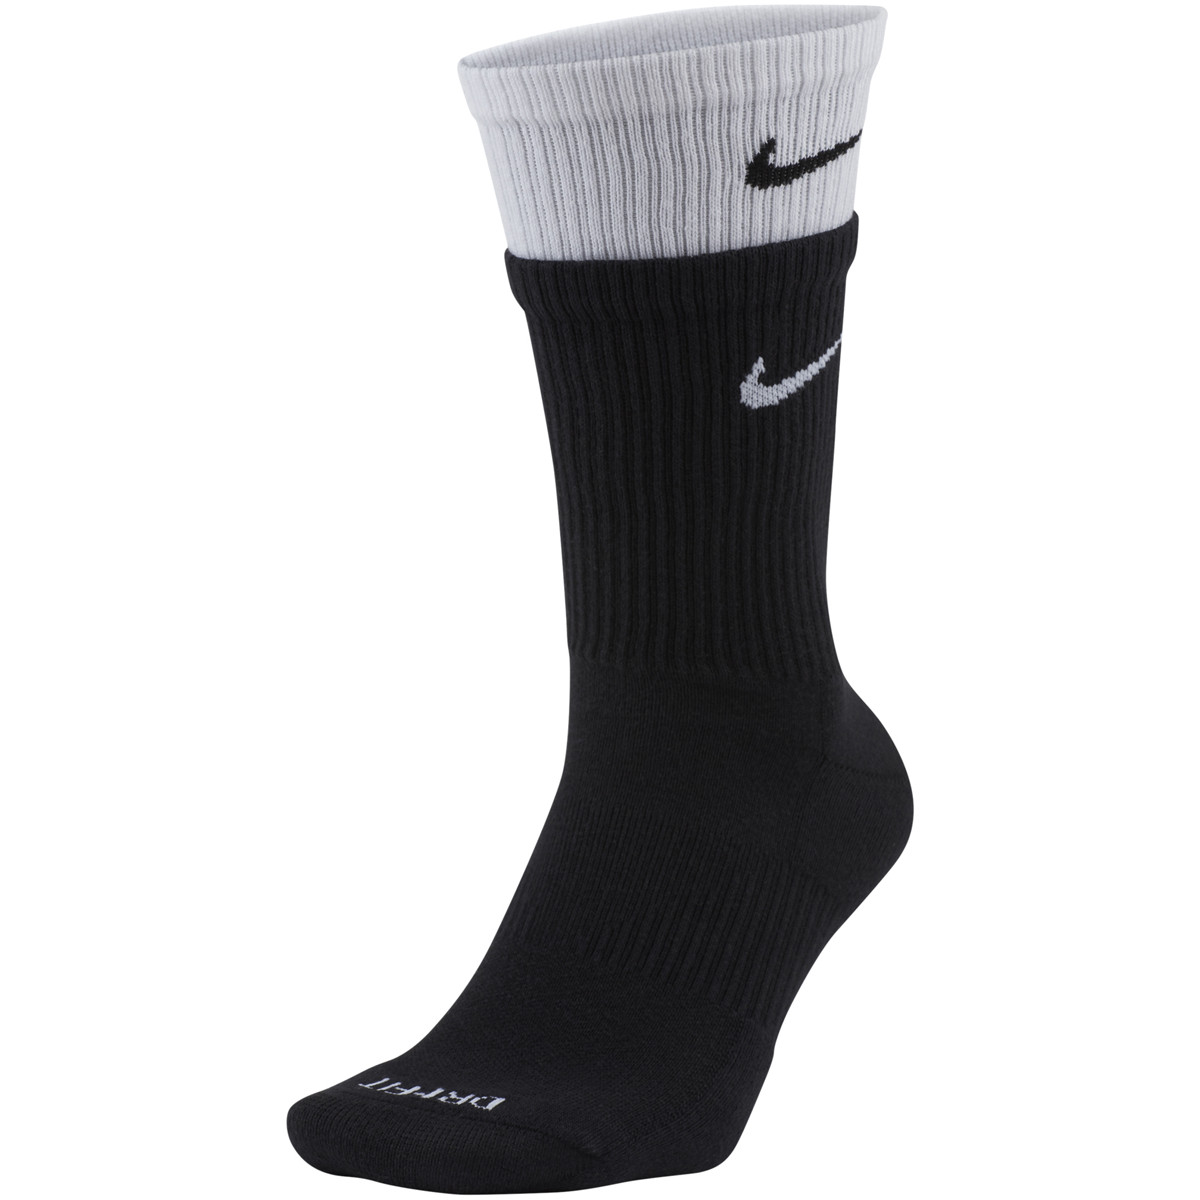 PAR DE CALCETINES NIKE EVERYDAY PLUS CUSHIONED - NIKE - Mujer - Ropa